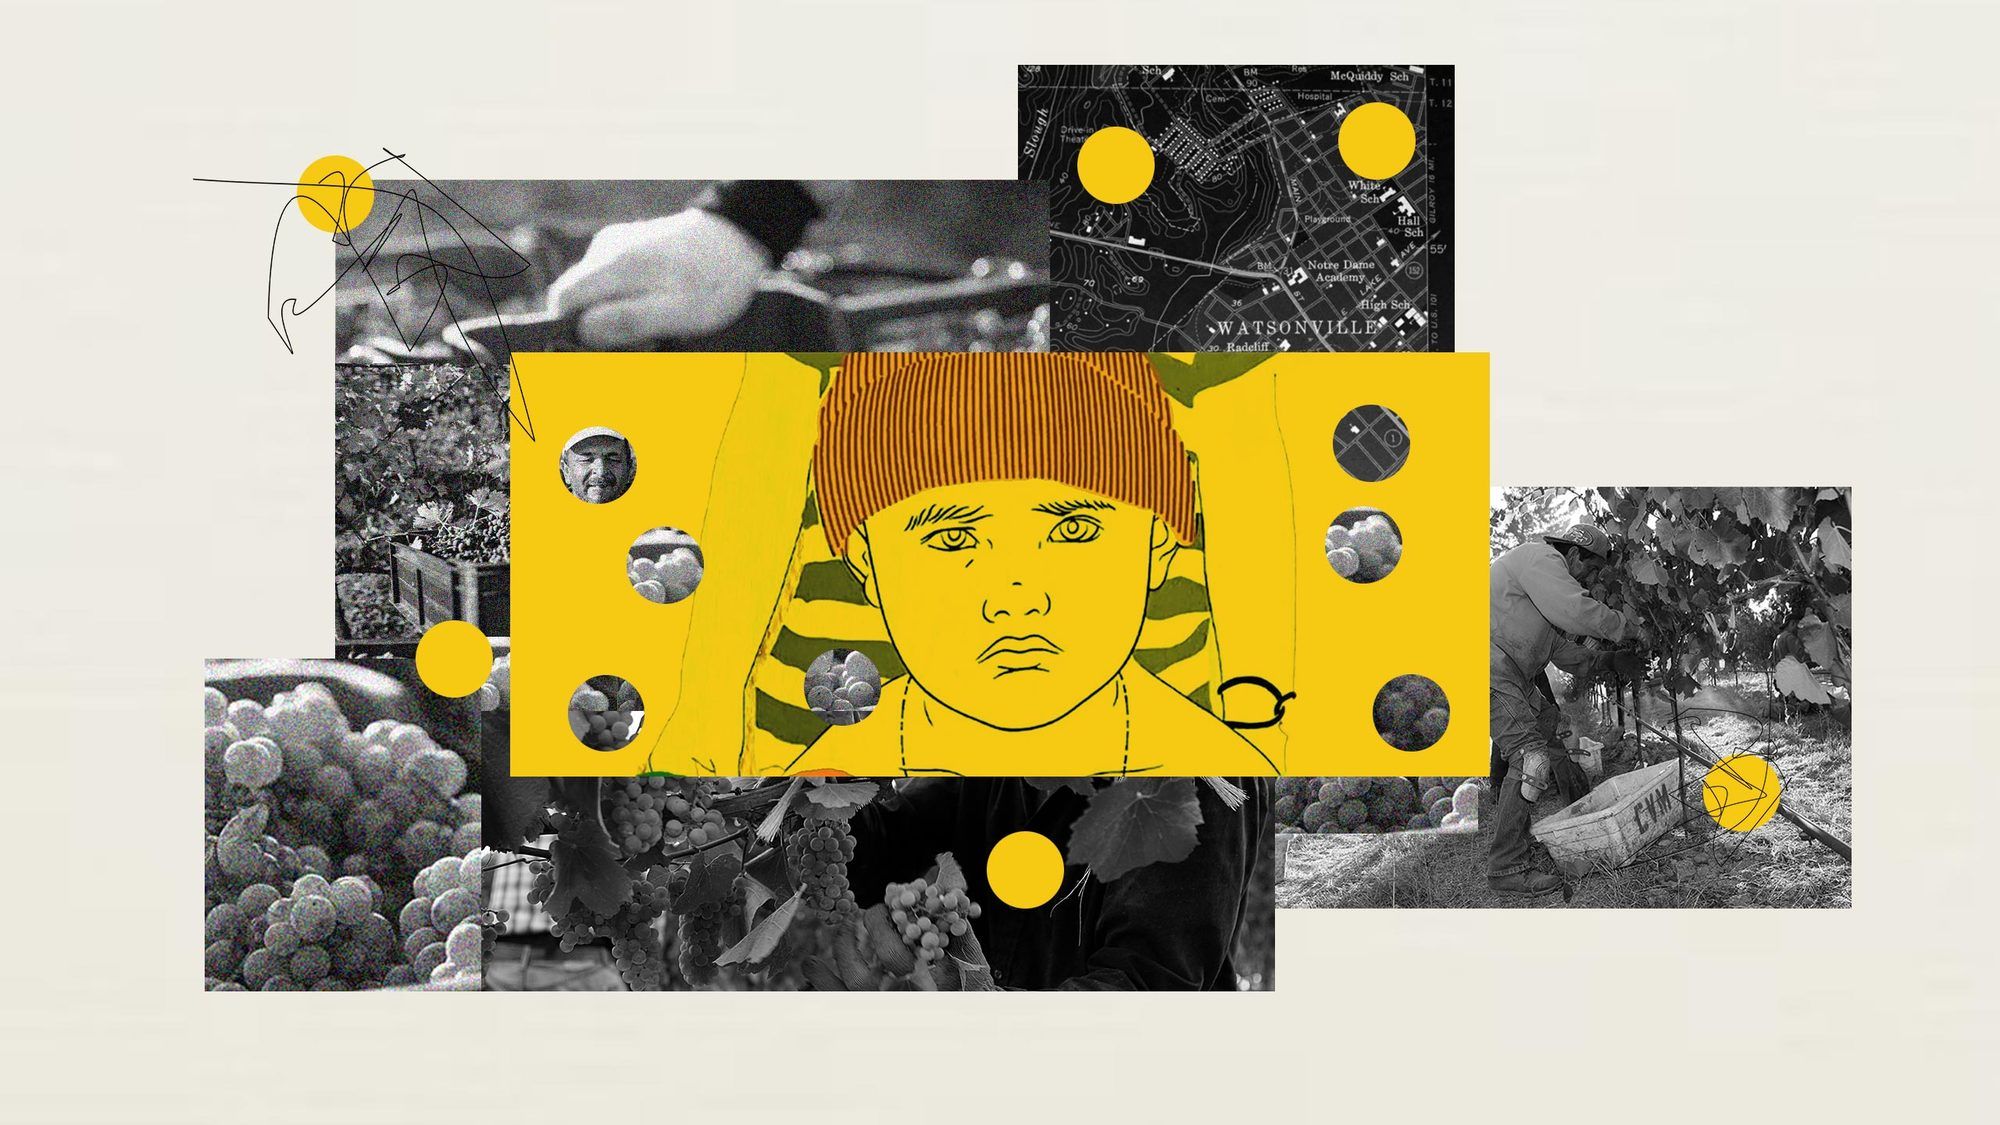 Orange rectangle with child's face illustrated with cut out holes and black and white photos of grapes in background with orange dots December 2021.